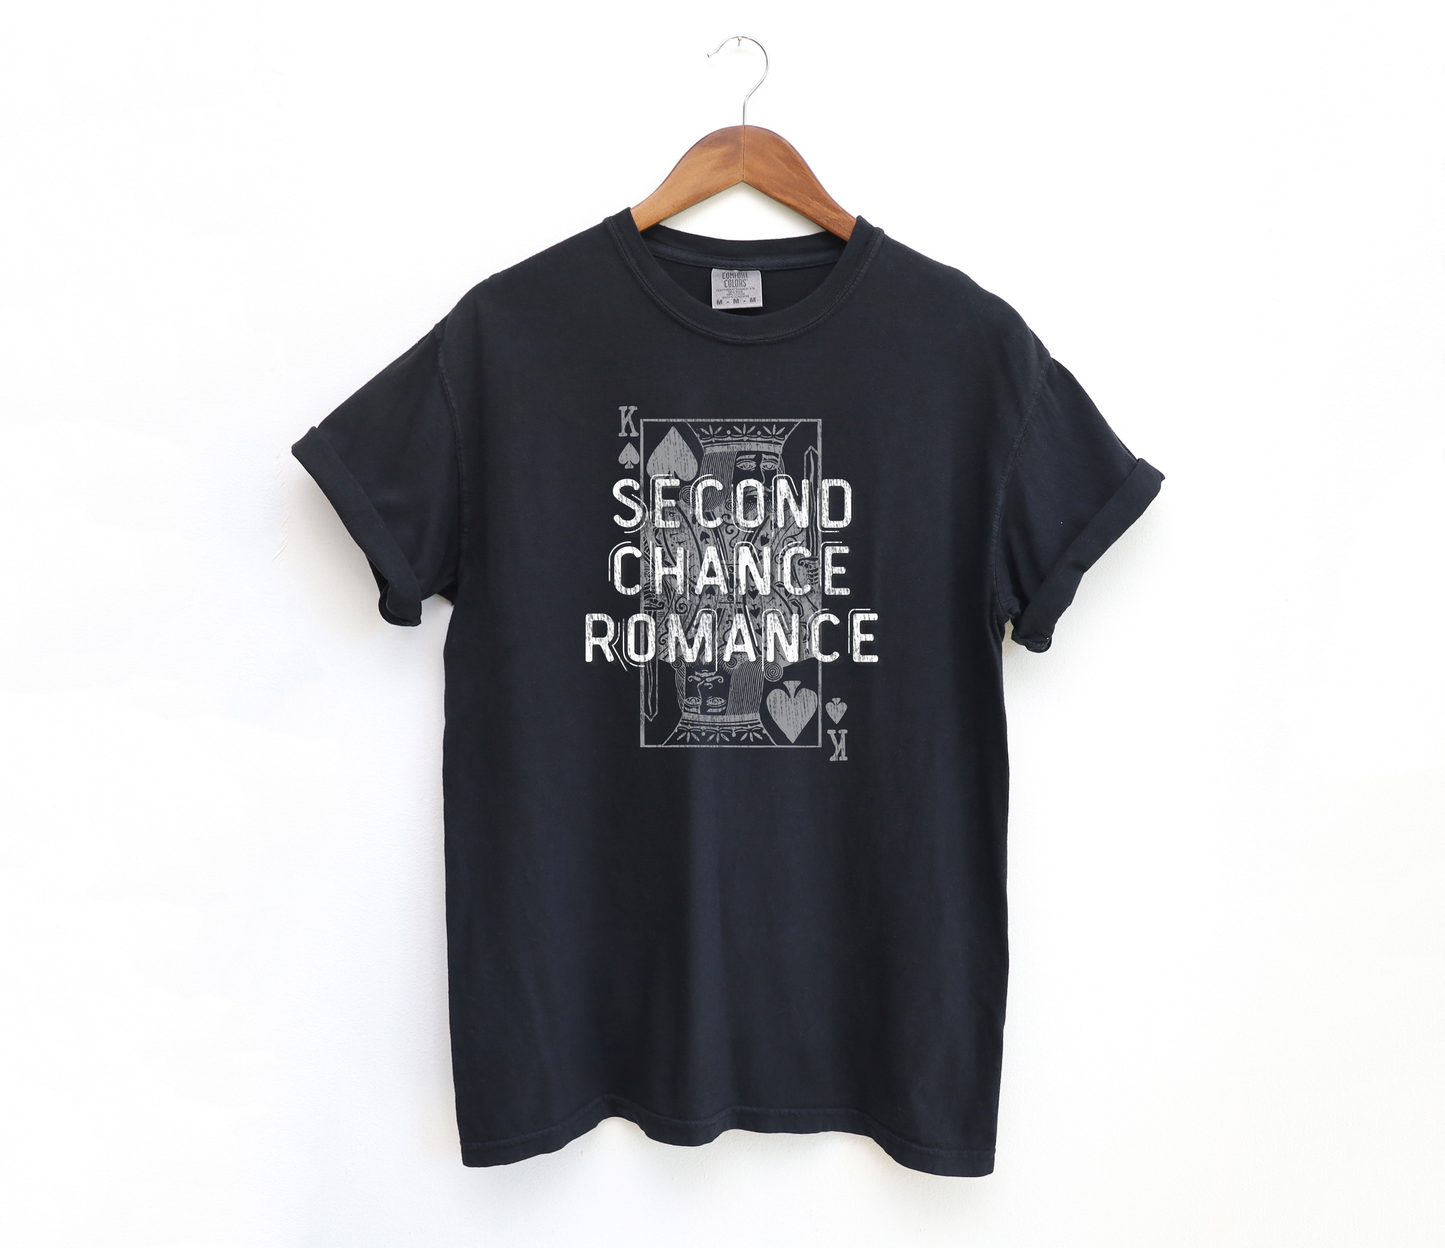 second chance romance t-shirt in black